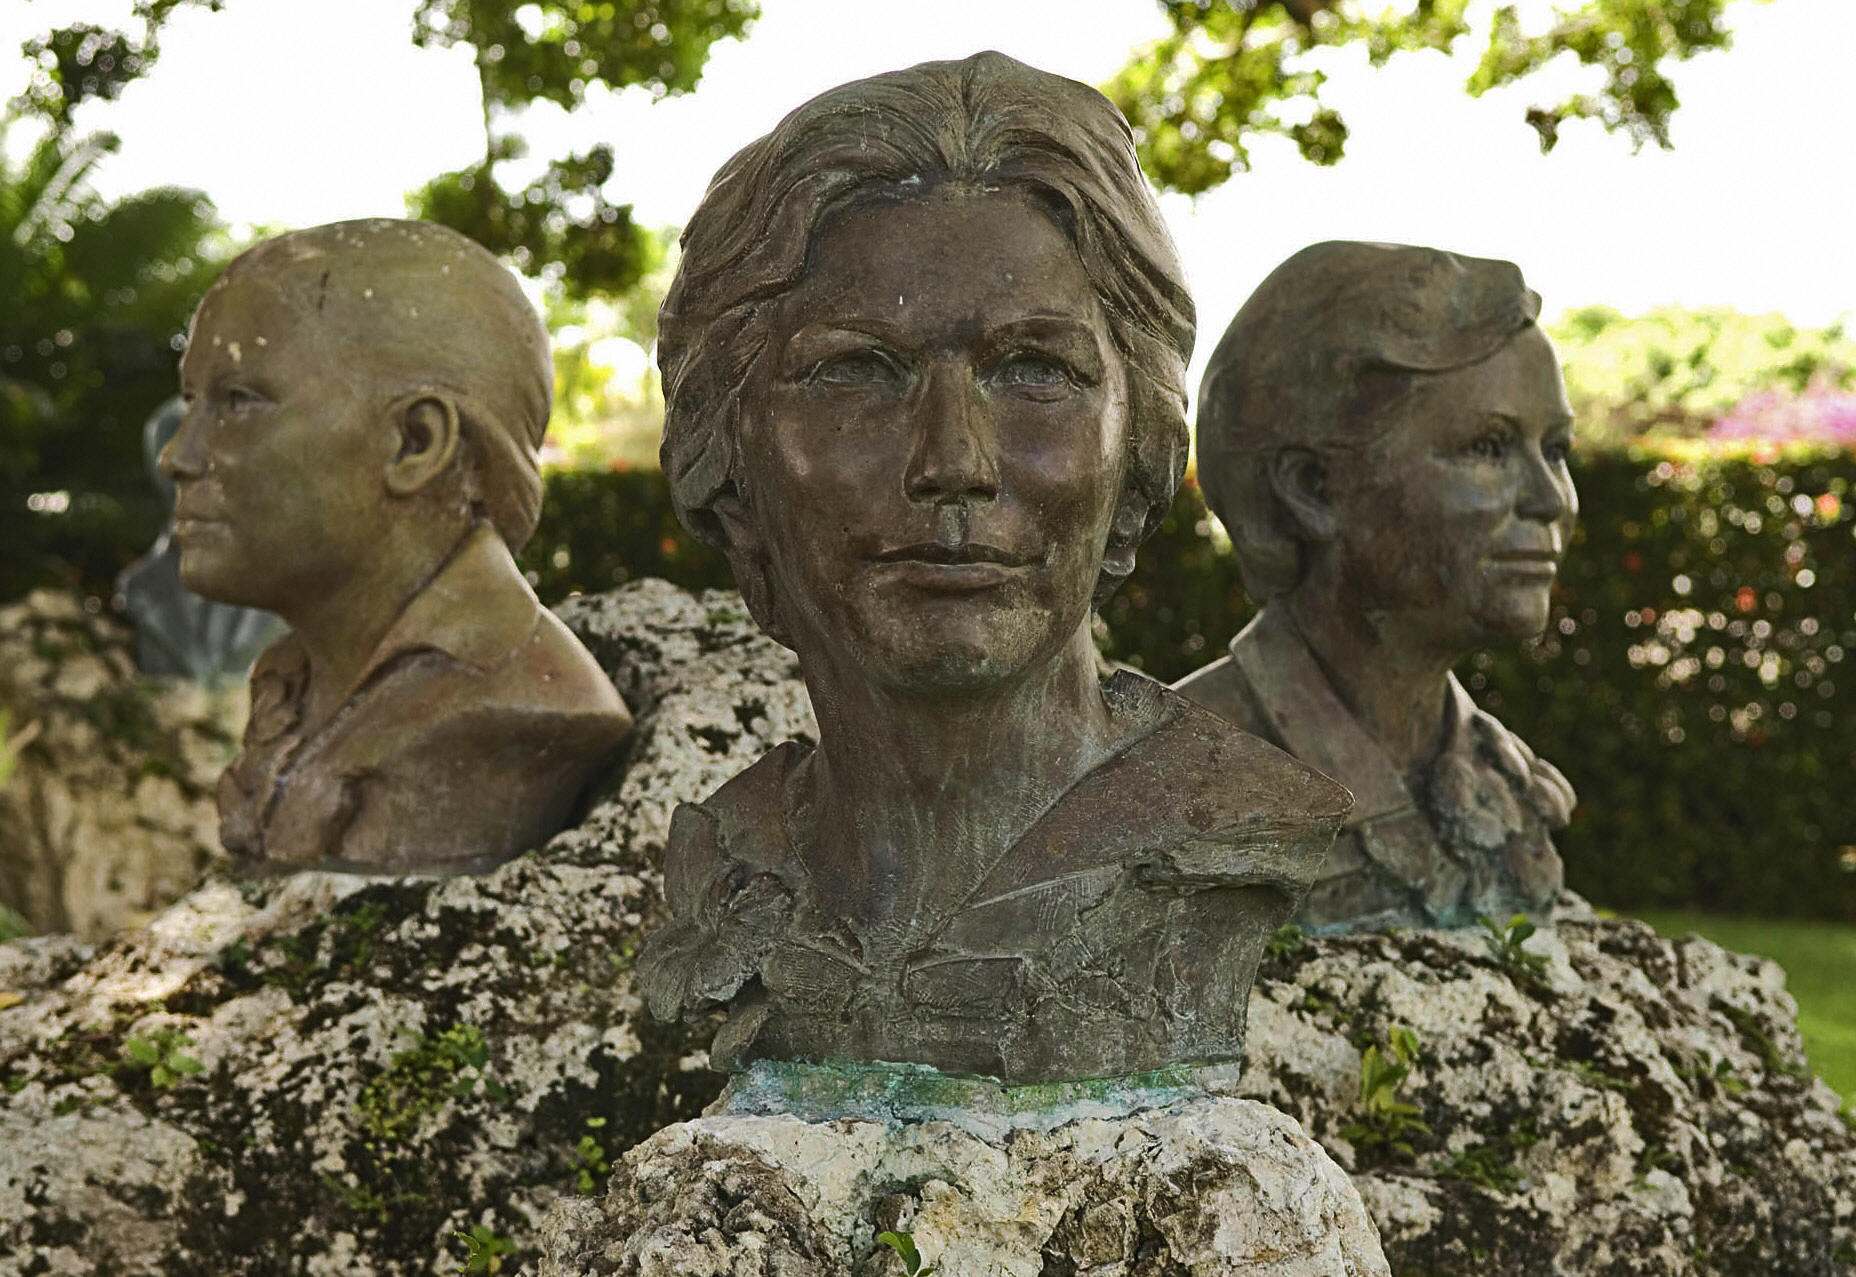 Busts of the Mirabal sisters at the muse